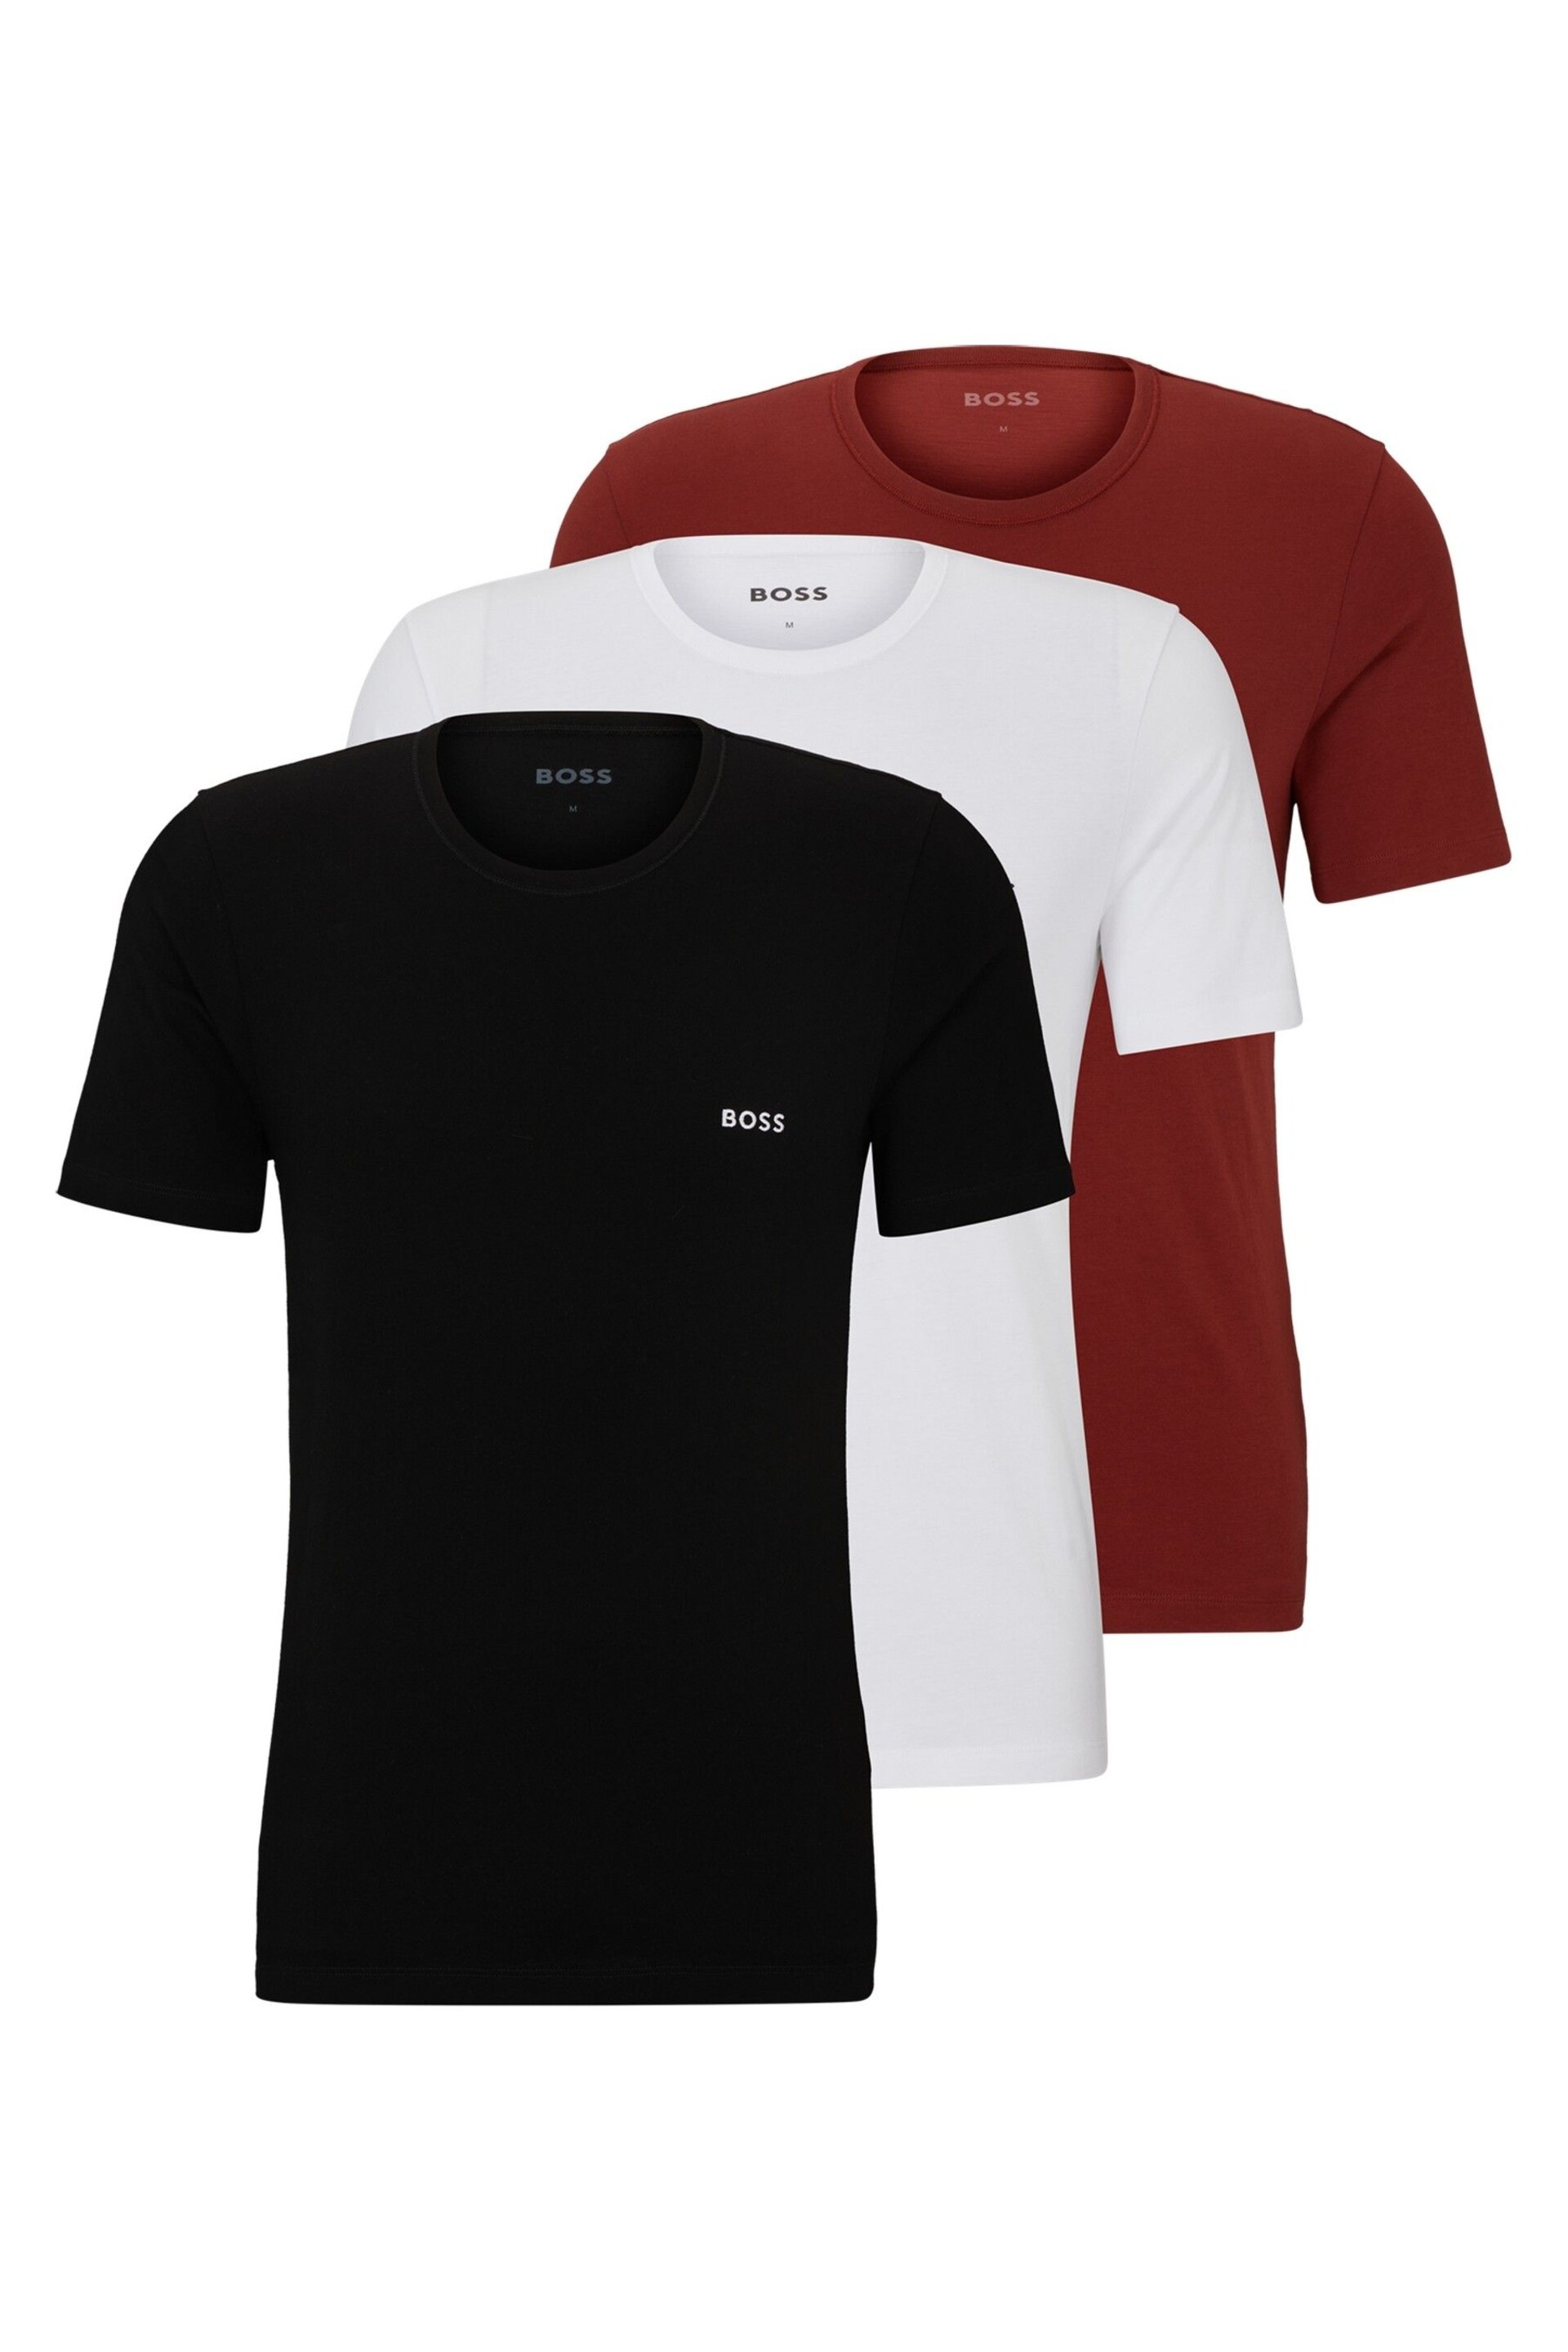 BOSS Black Three-Pack Of Underwear T-Shirts In Cotton Jersey - Image 1 of 5